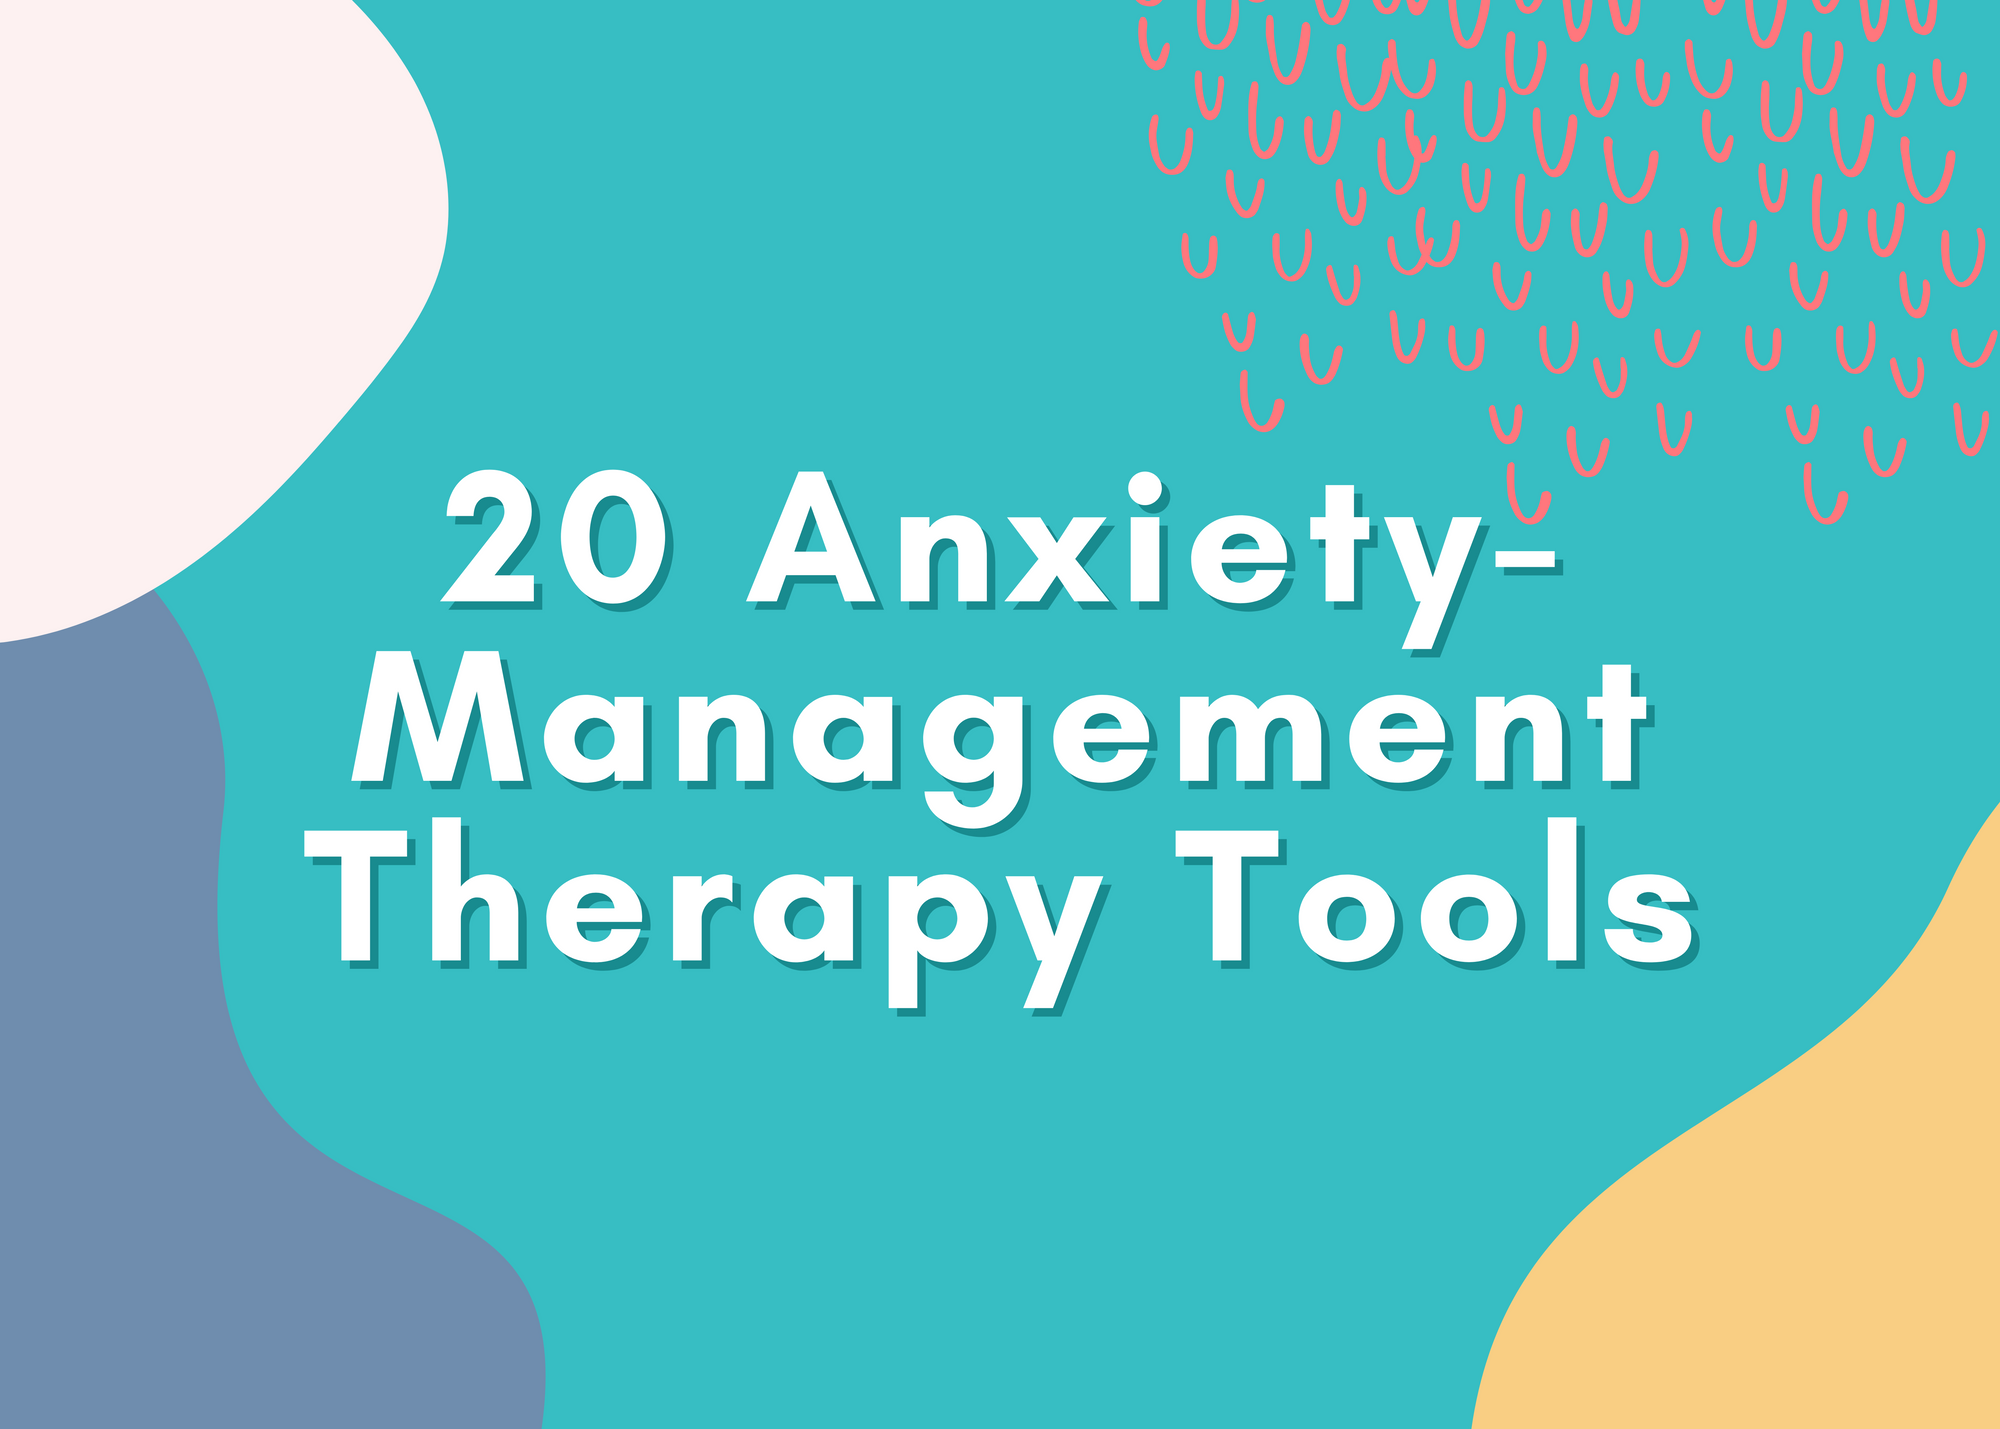 Tackle anxiety with this guided notebook created by therapists